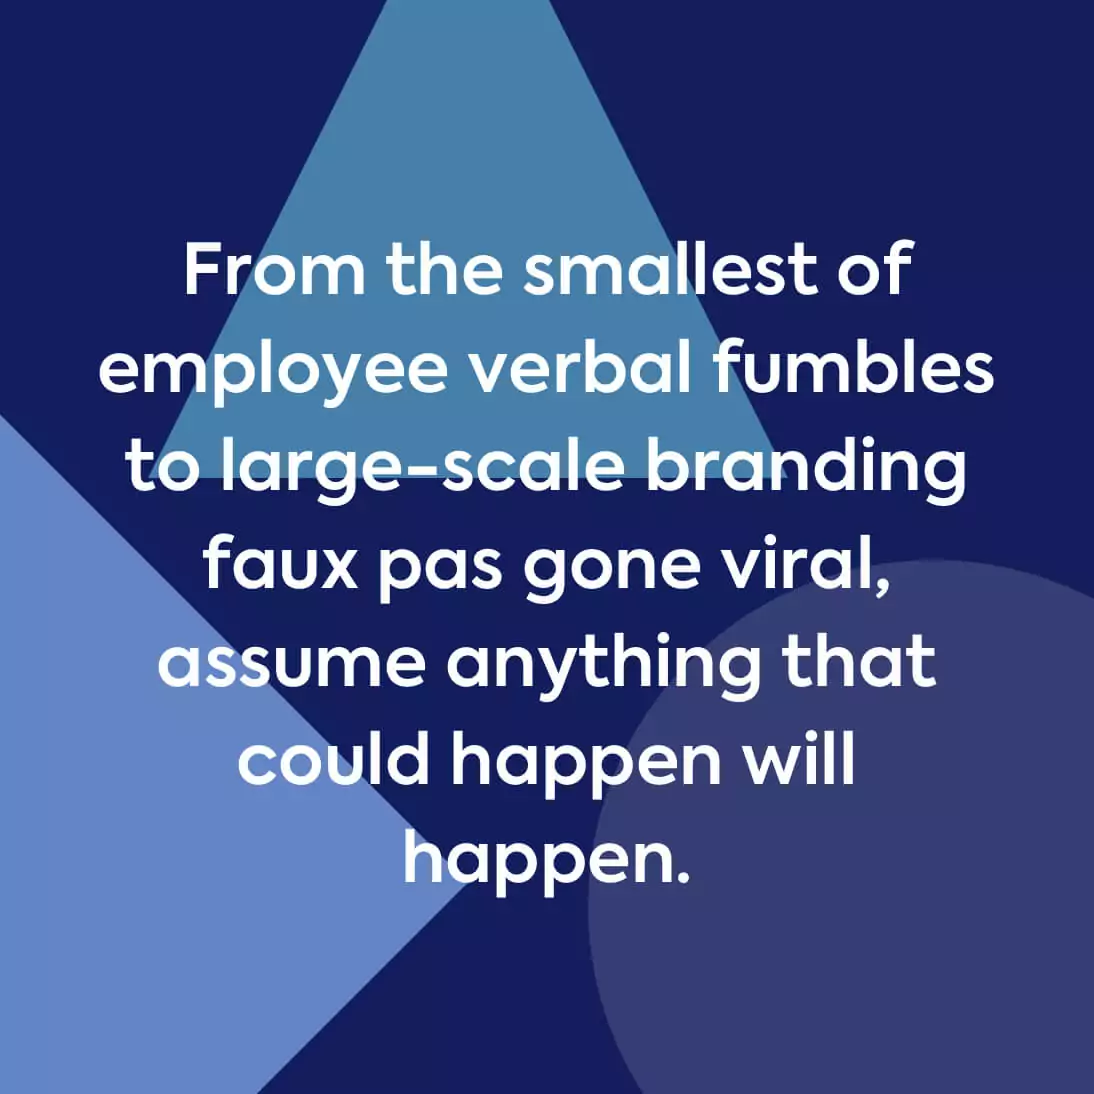 From the smallest of employee verb fumbles to large branding fumbles gone viral.